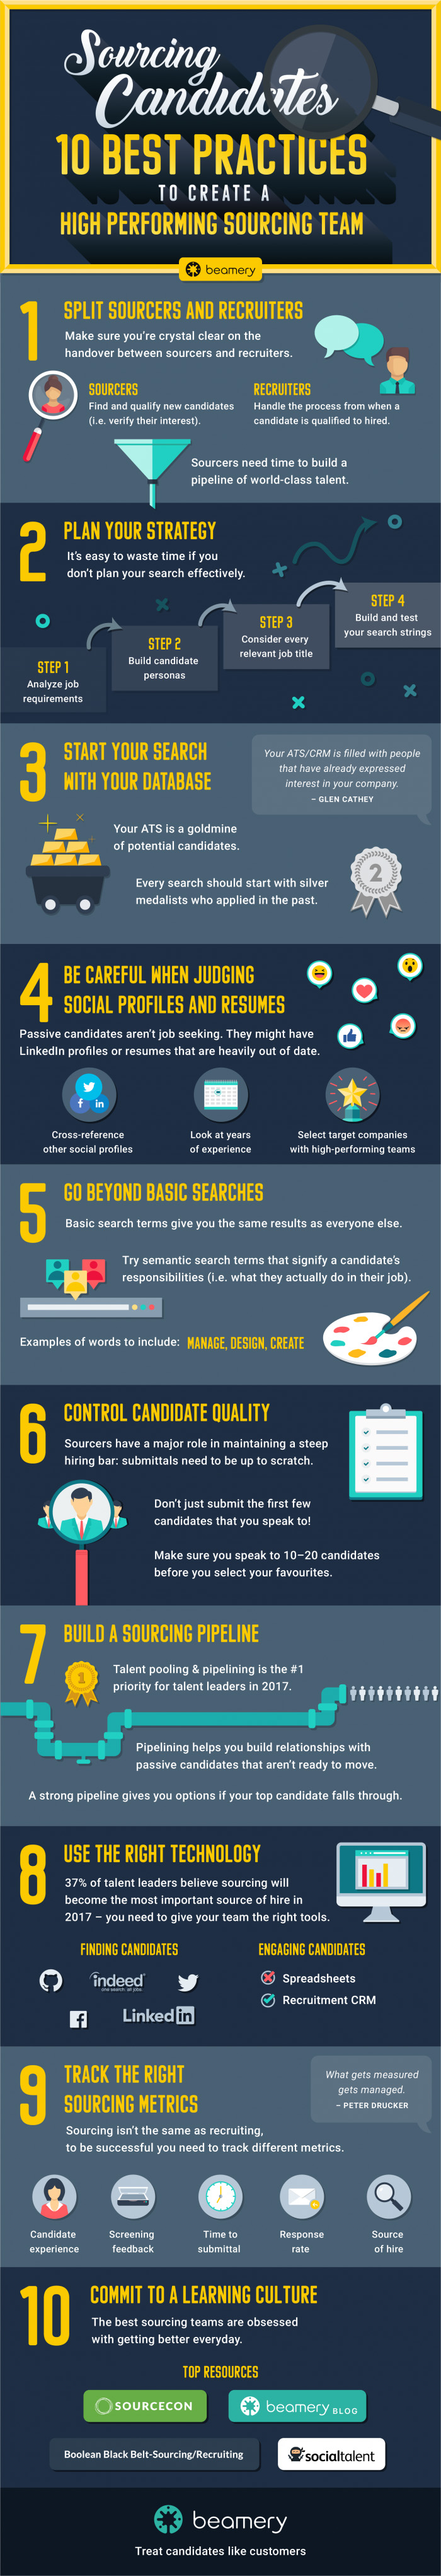 Sourcing Candidates: 10 Best Practices